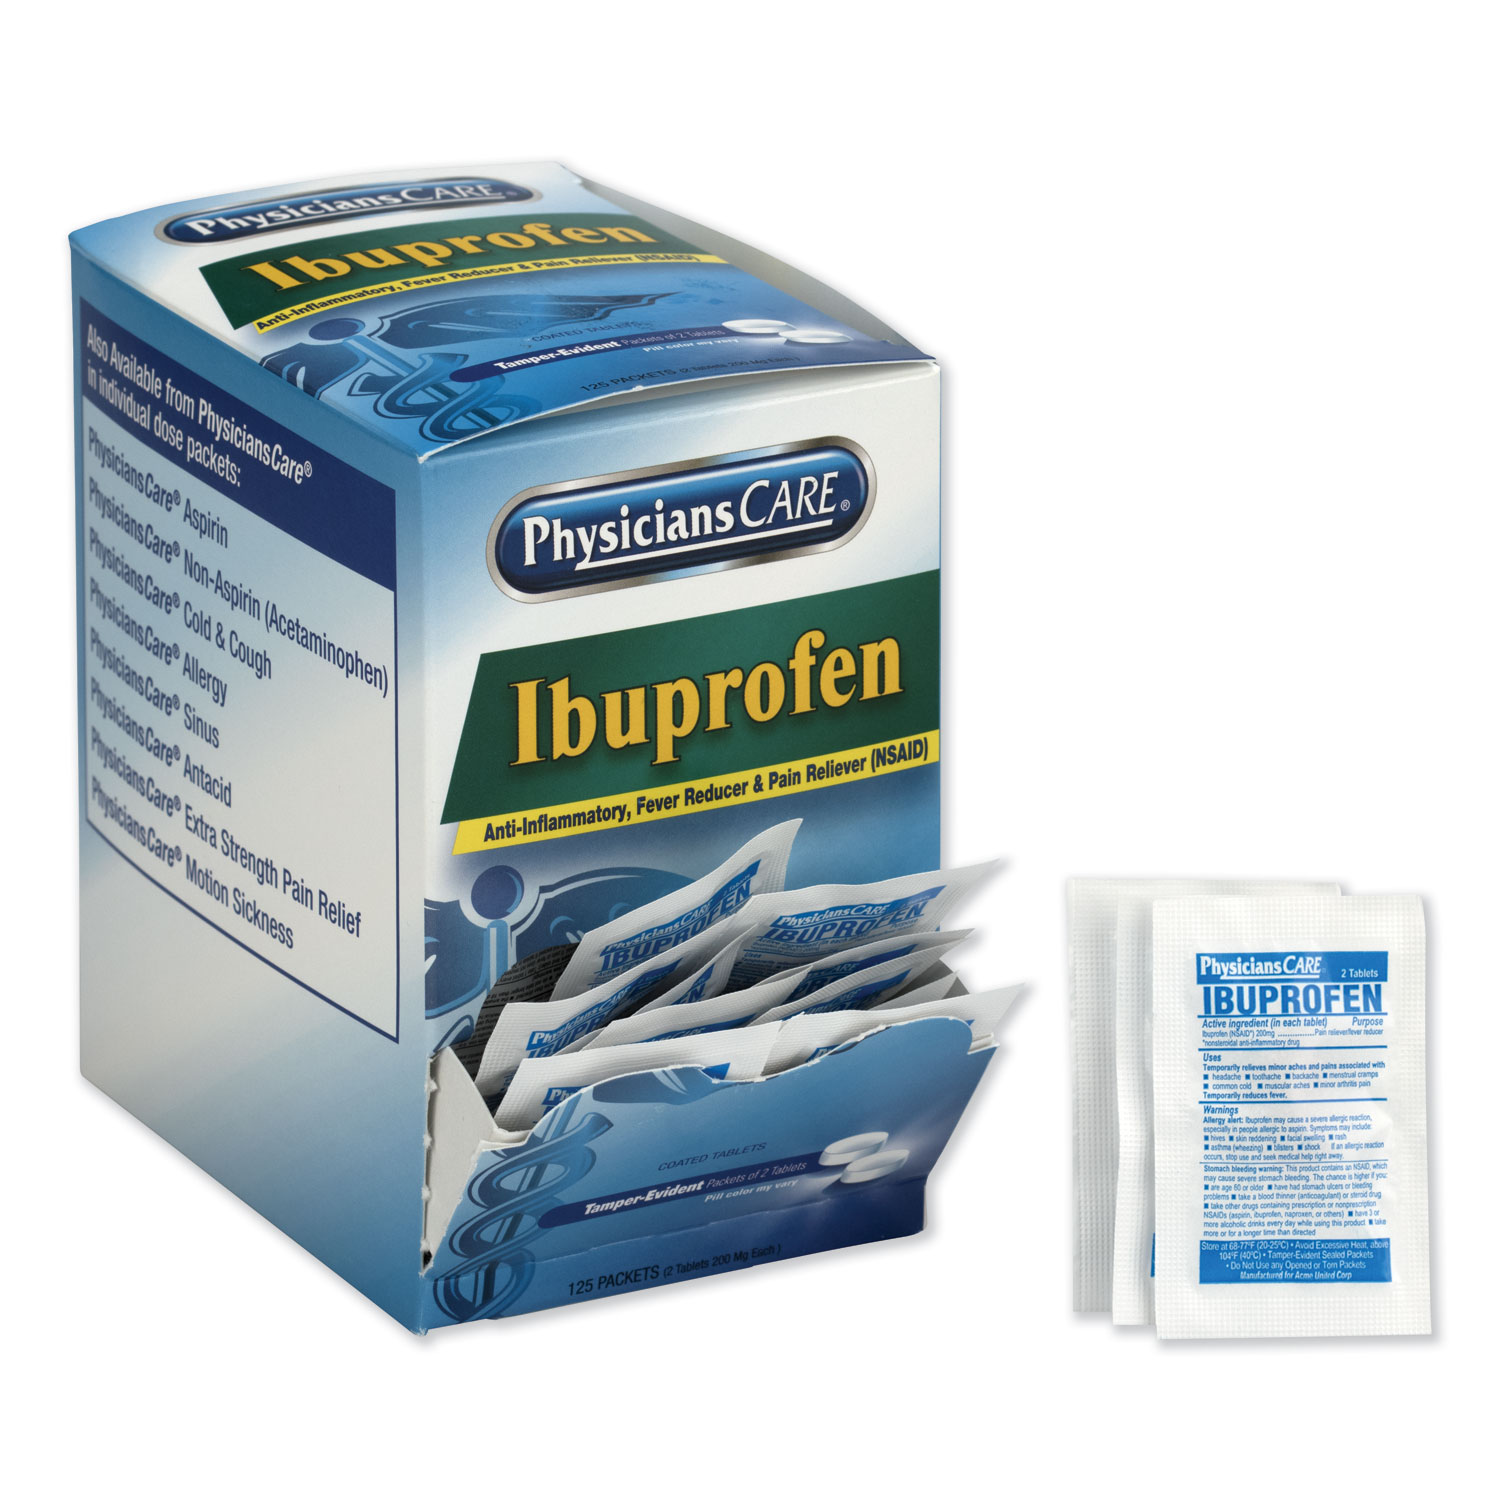  PhysiciansCare 90109-001 Ibuprofen Pain Reliever, Two-Pack, 125 Packs/Box (ACM90109) 